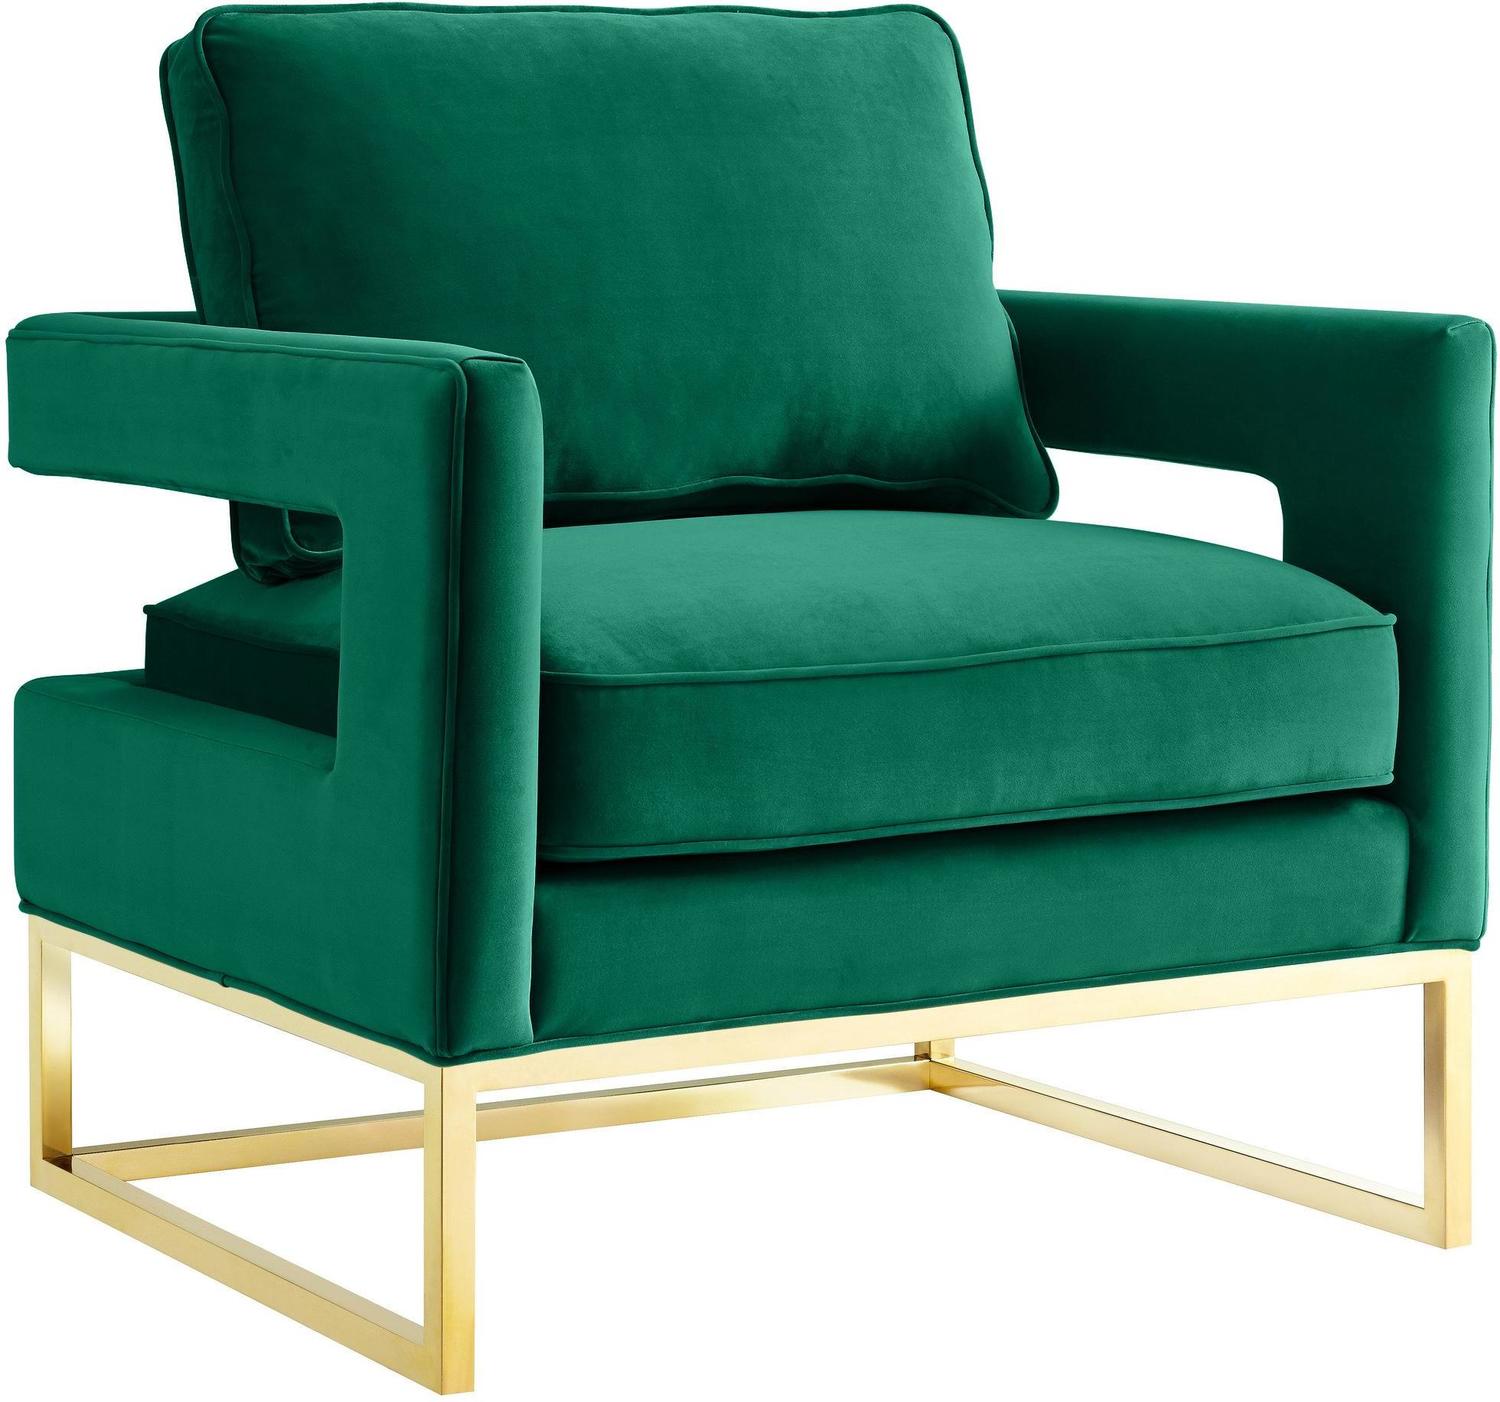 small navy accent chair Tov Furniture Accent Chairs Green